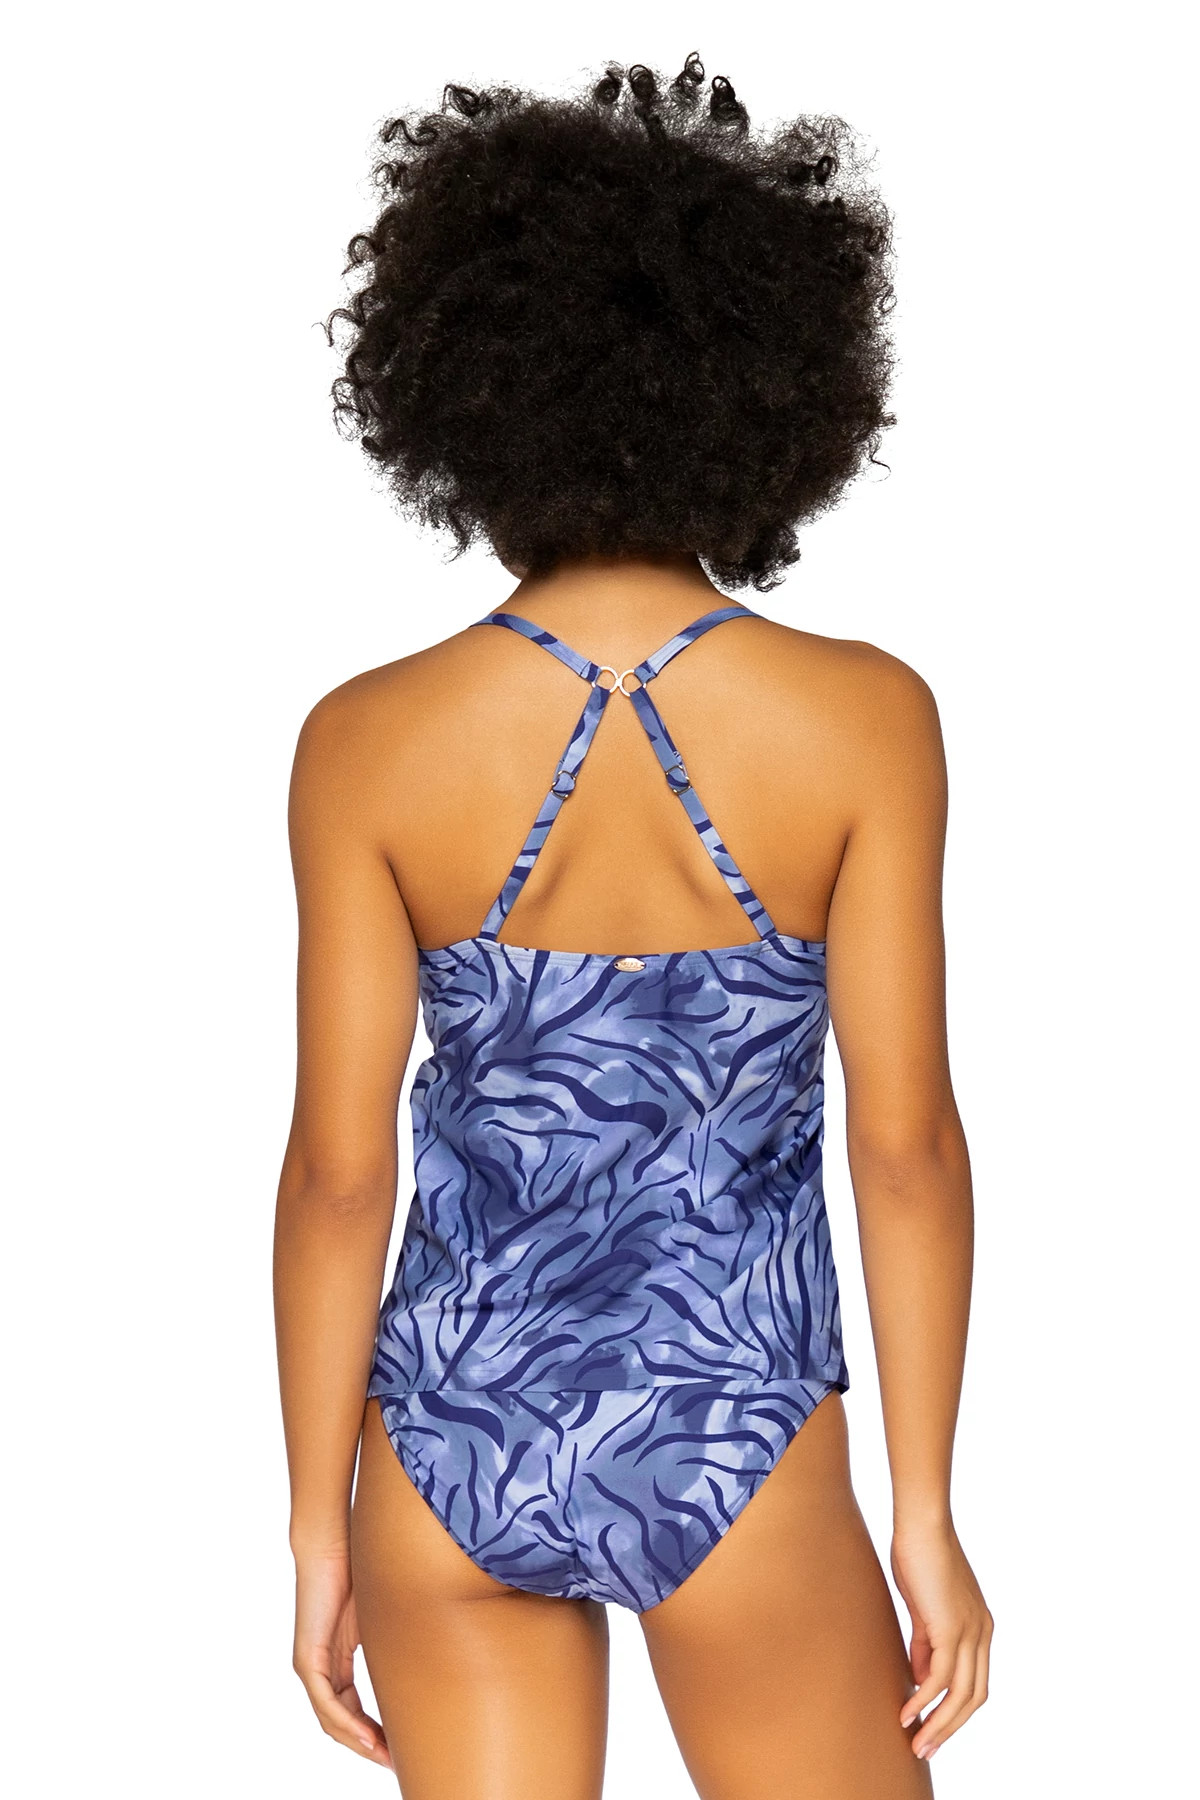 SUMATRA Crossroads Over The Shoulder Tankini Top (E-H Cup) image number 2